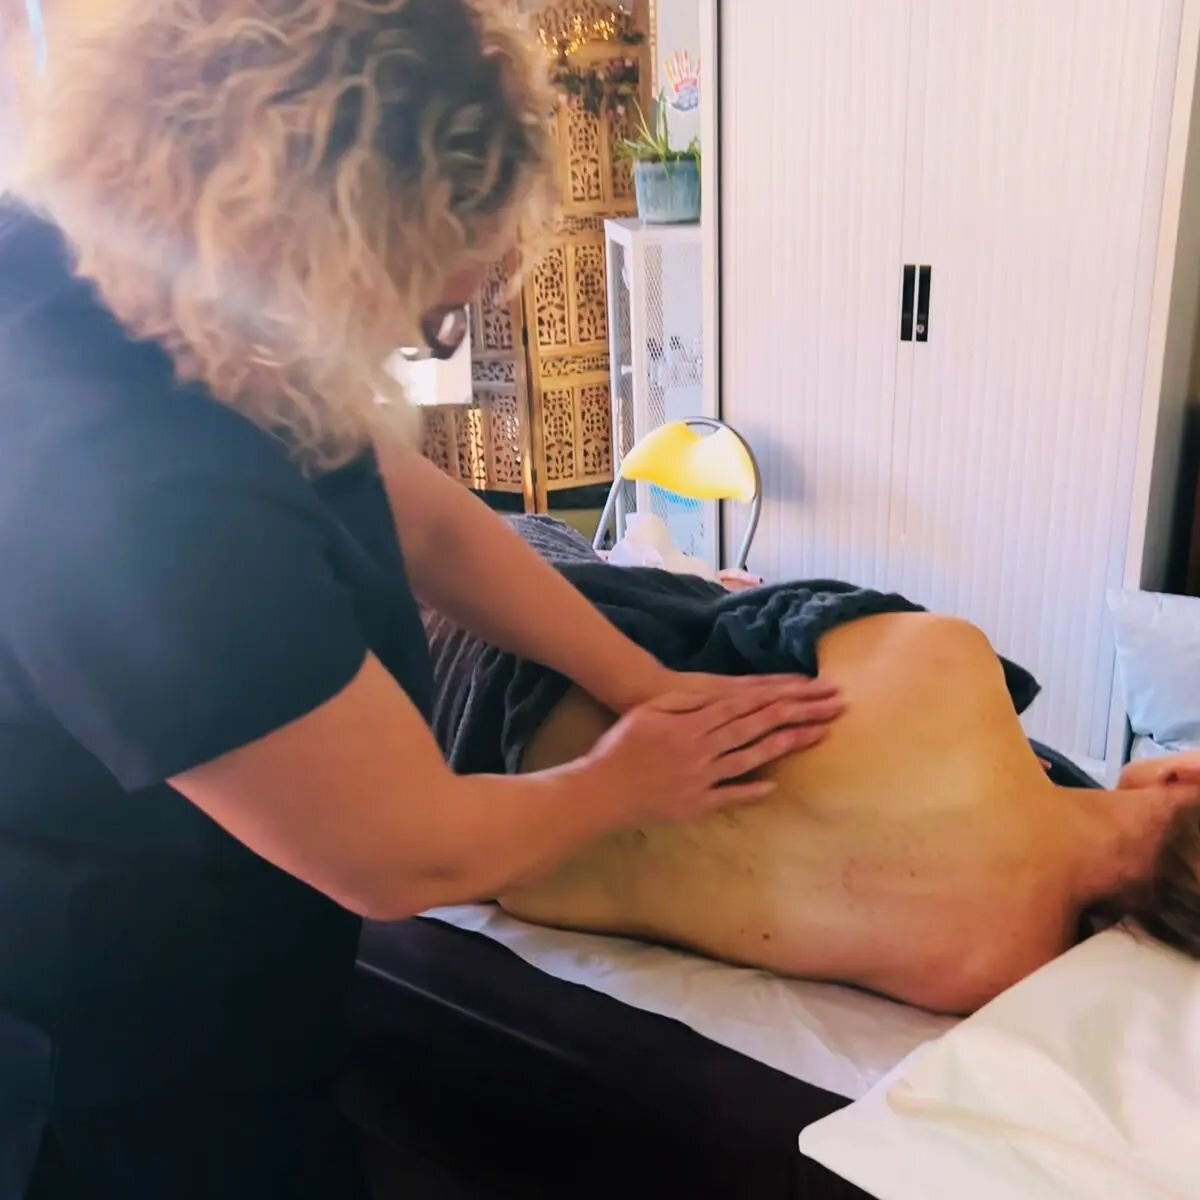 During February, relax and renew are offering a Prenancy massage for &pound;30!!
That's a whole hour of pampering for the lovely mum's to be.
Is someone you know, finishing work for maternity leave?
A loved one who is pregnant, a baby shower gift?

F